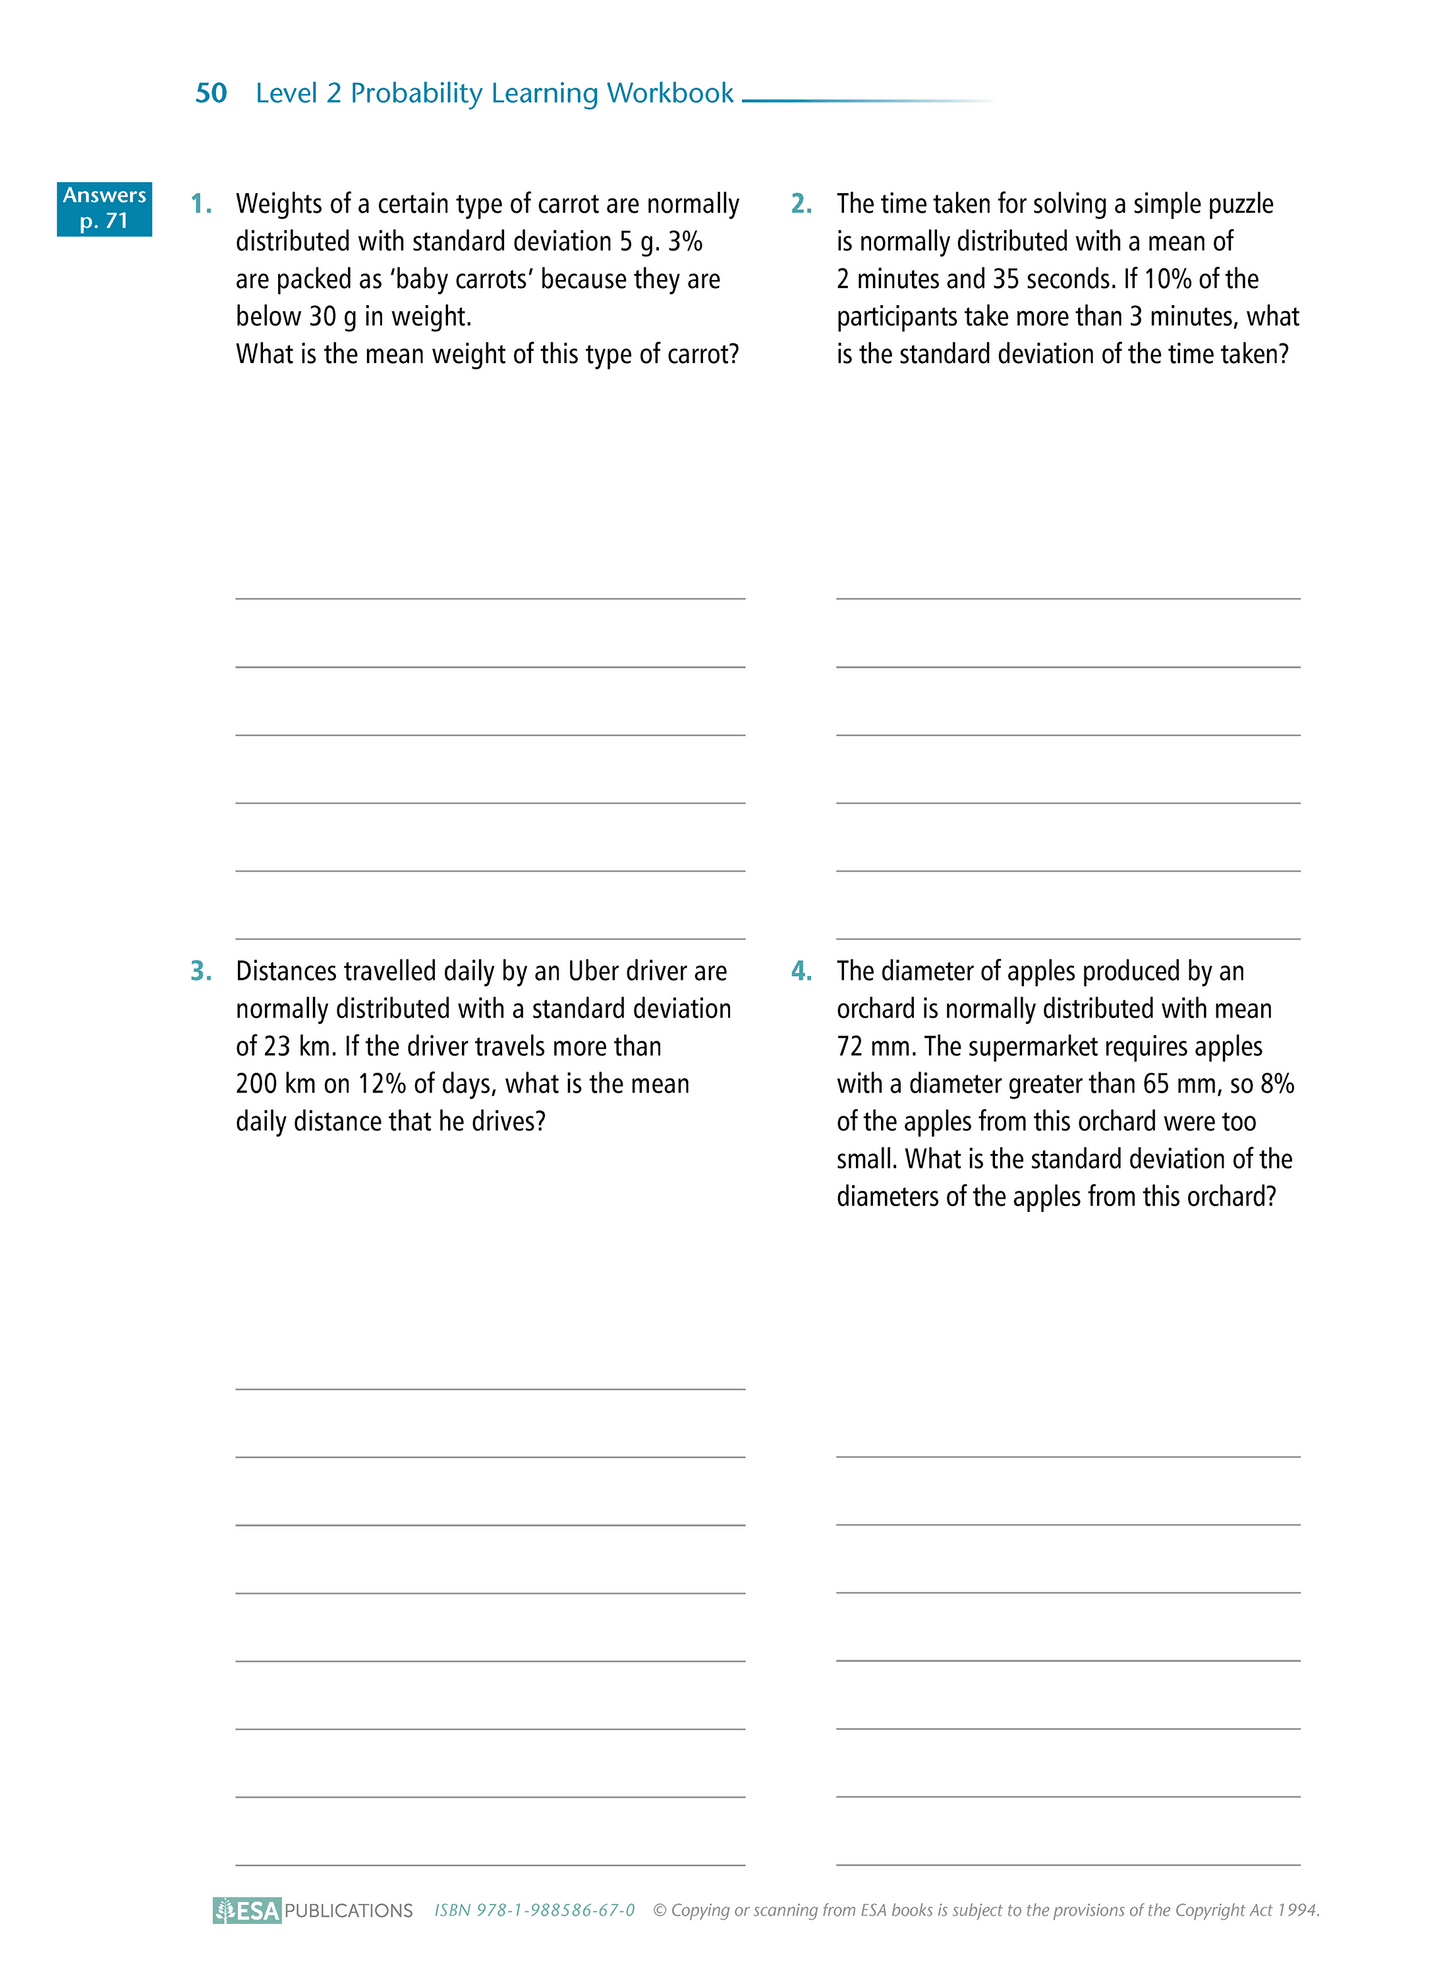 Level 2 Probability 2.12 Learning Workbook - SPECIAL (damaged stock at $5 each)